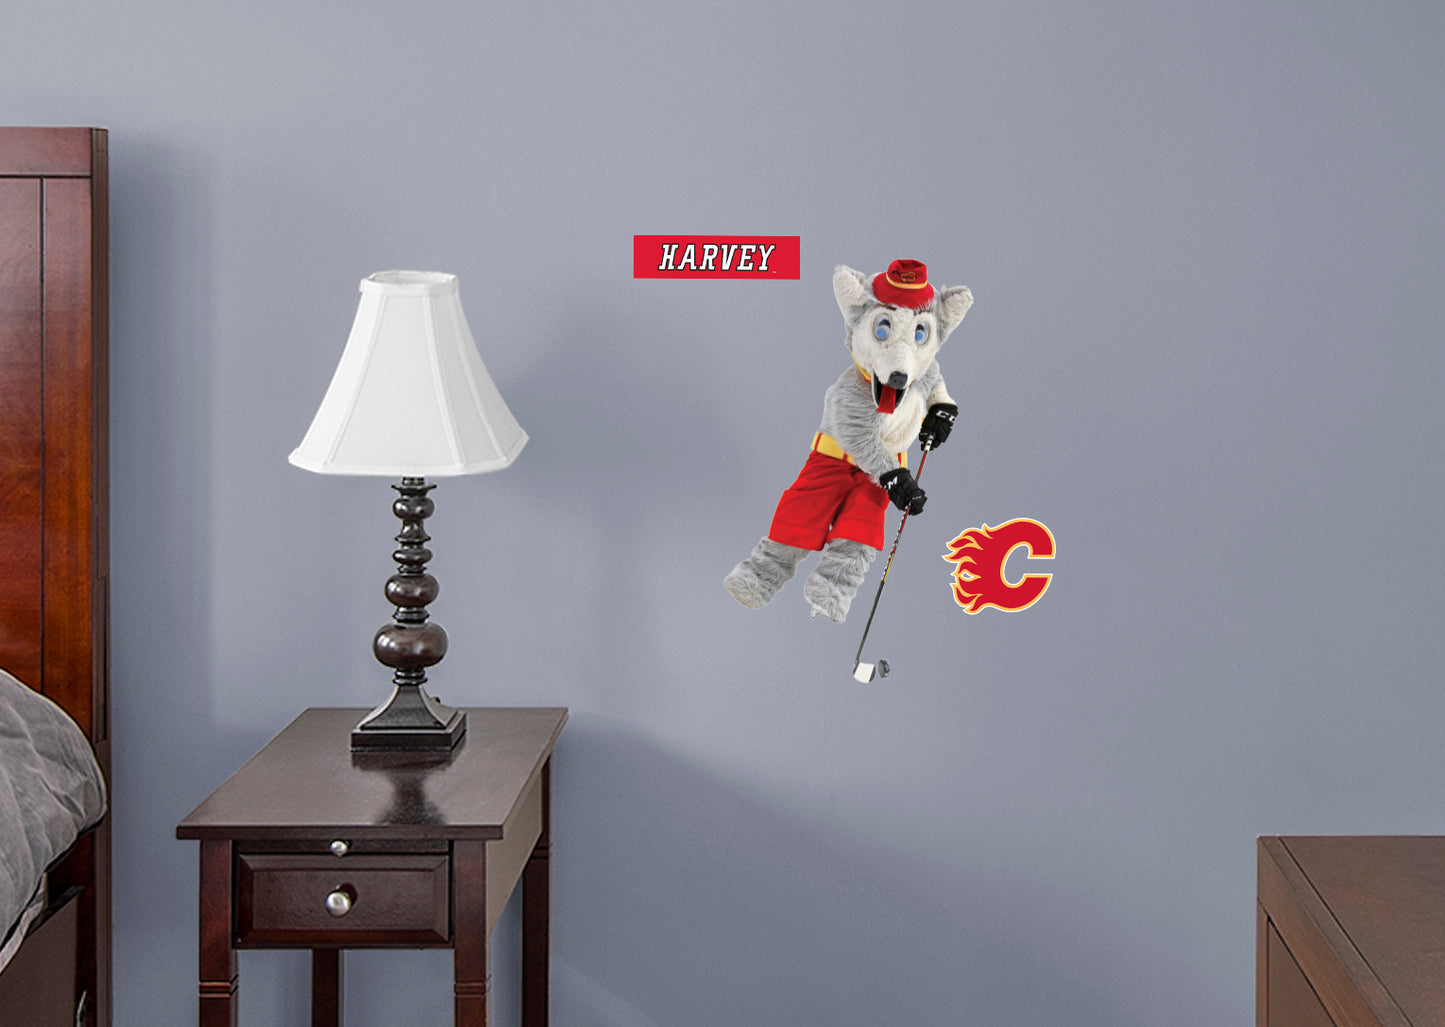 Calgary Flames: Harvey the Hound  Mascot        - Officially Licensed NHL Removable Wall   Adhesive Decal